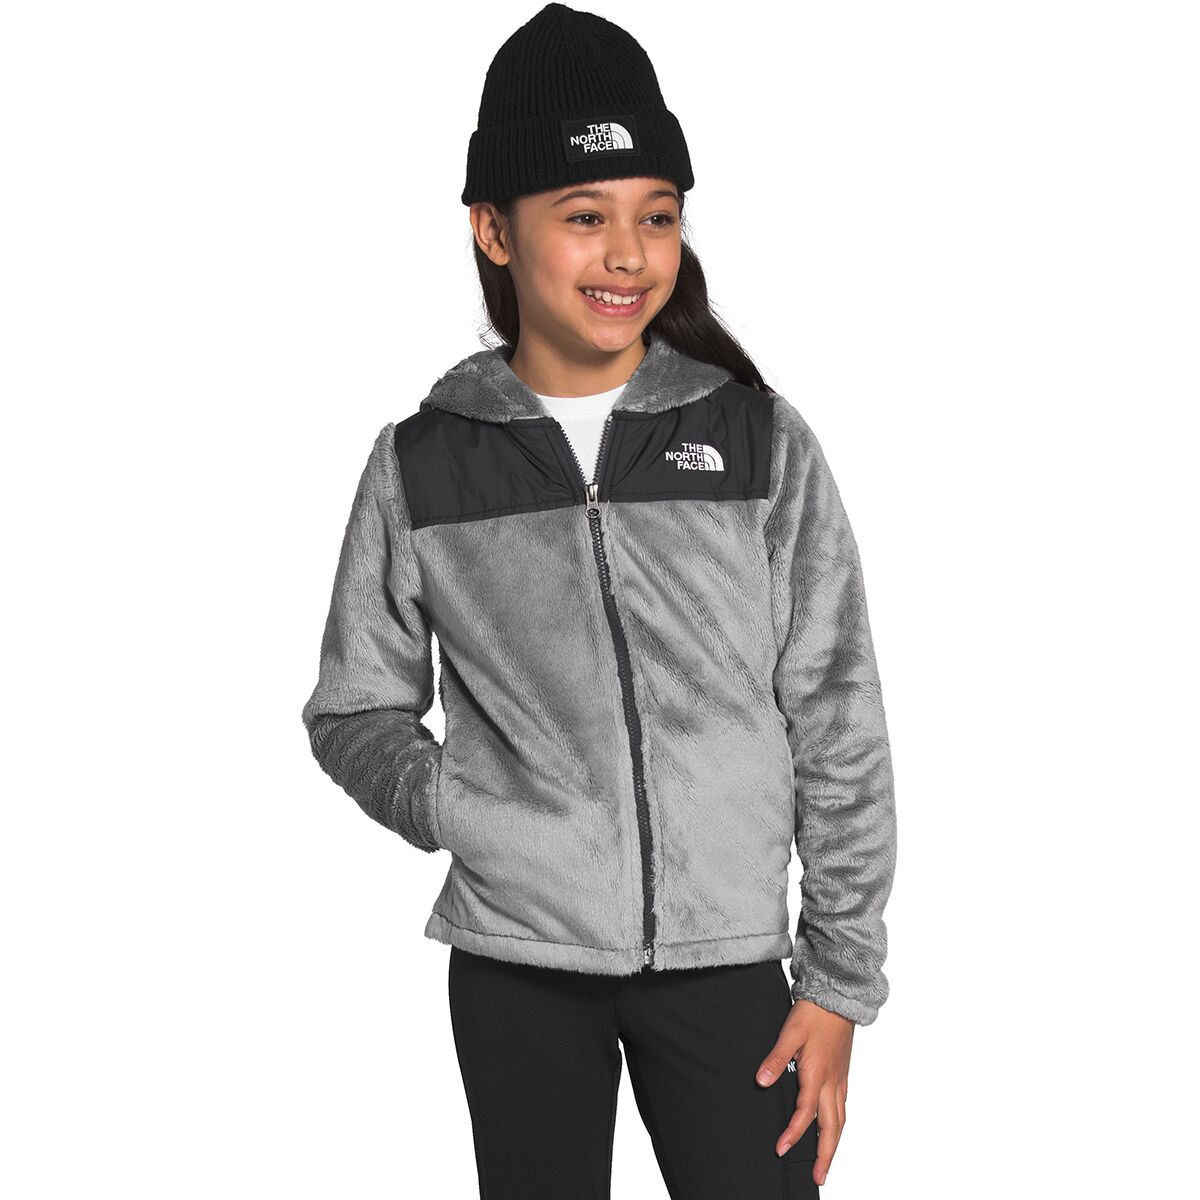 The North Face Oso Hooded Fleece Jacket - Girls' | Backcountry.com